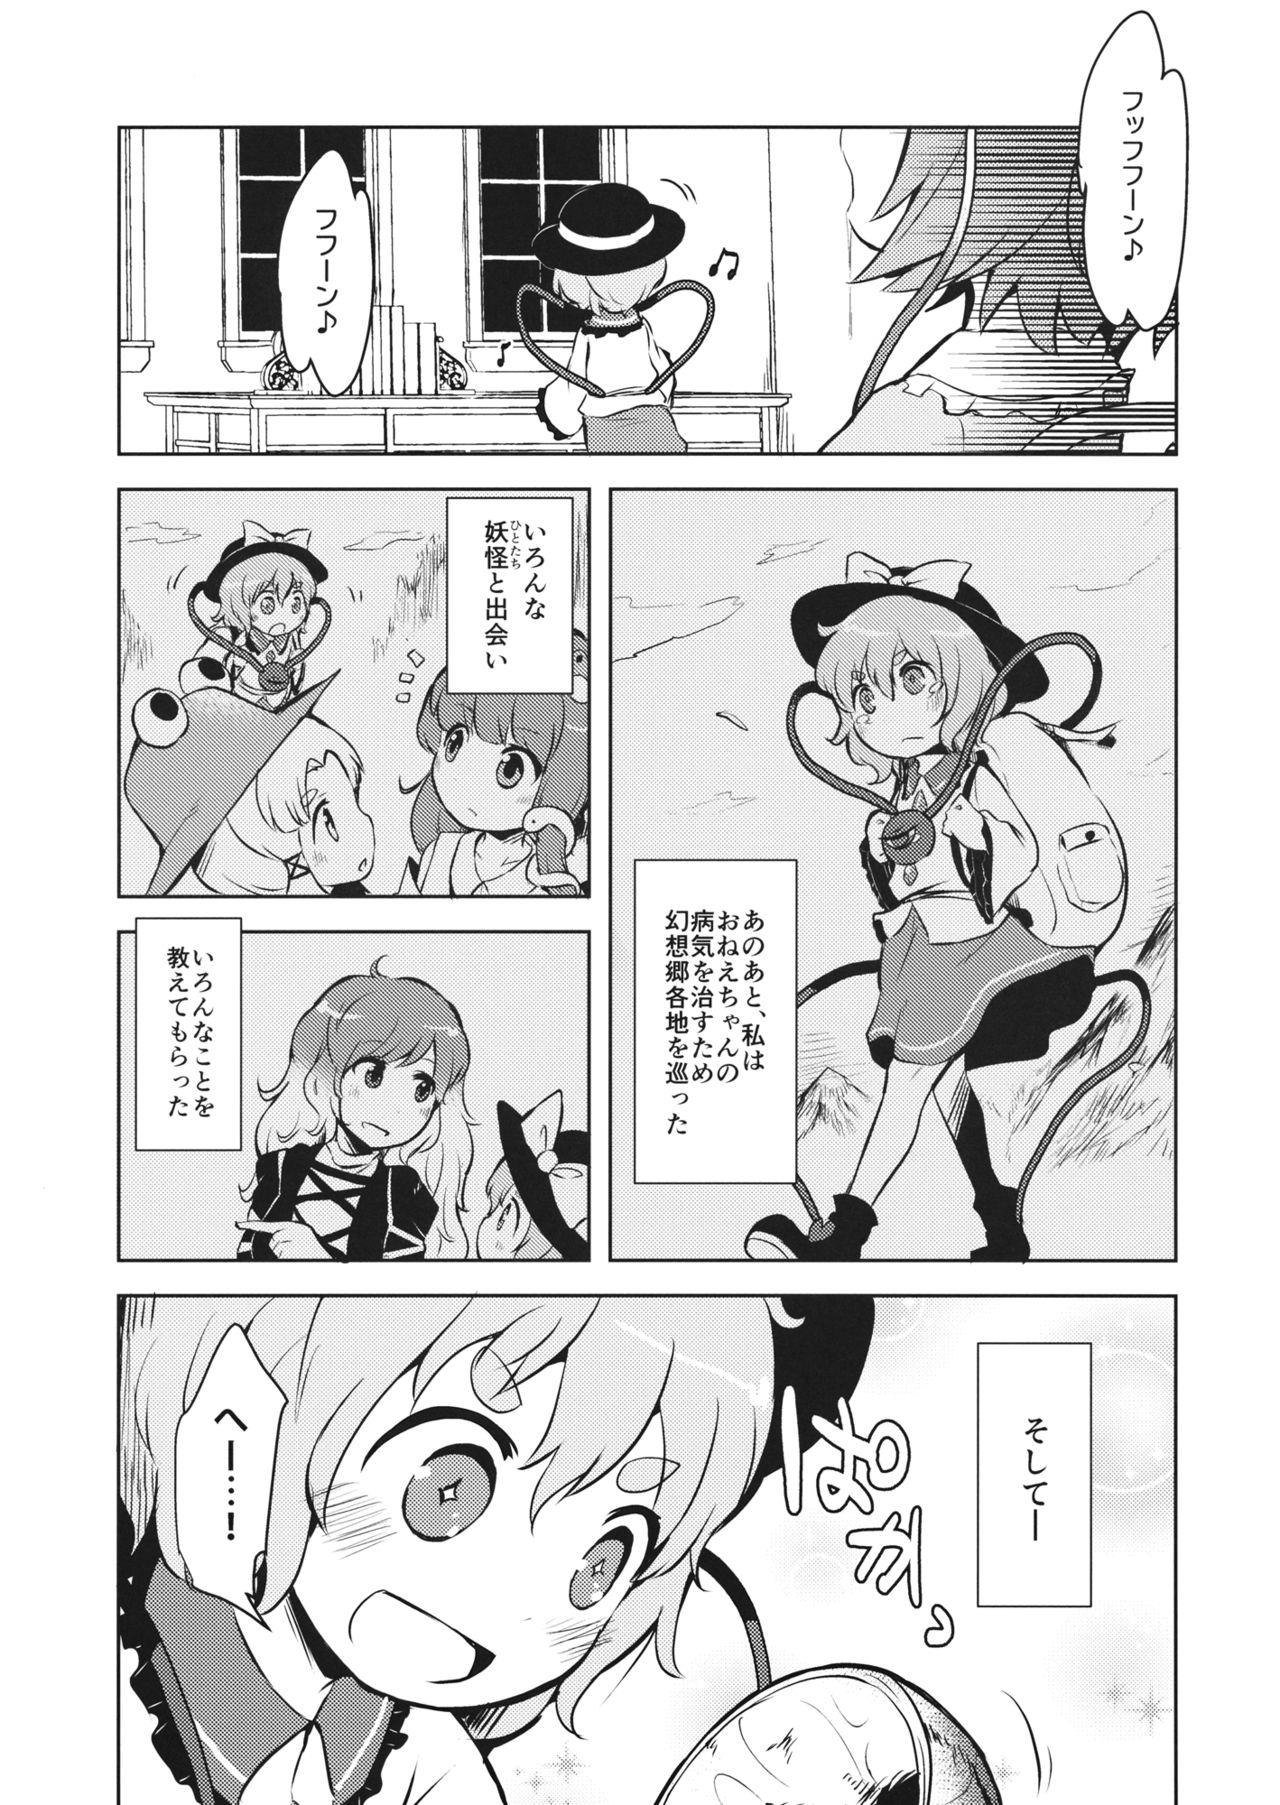 Missionary Porn FREAKS OUT! - Touhou project Freak - Page 8